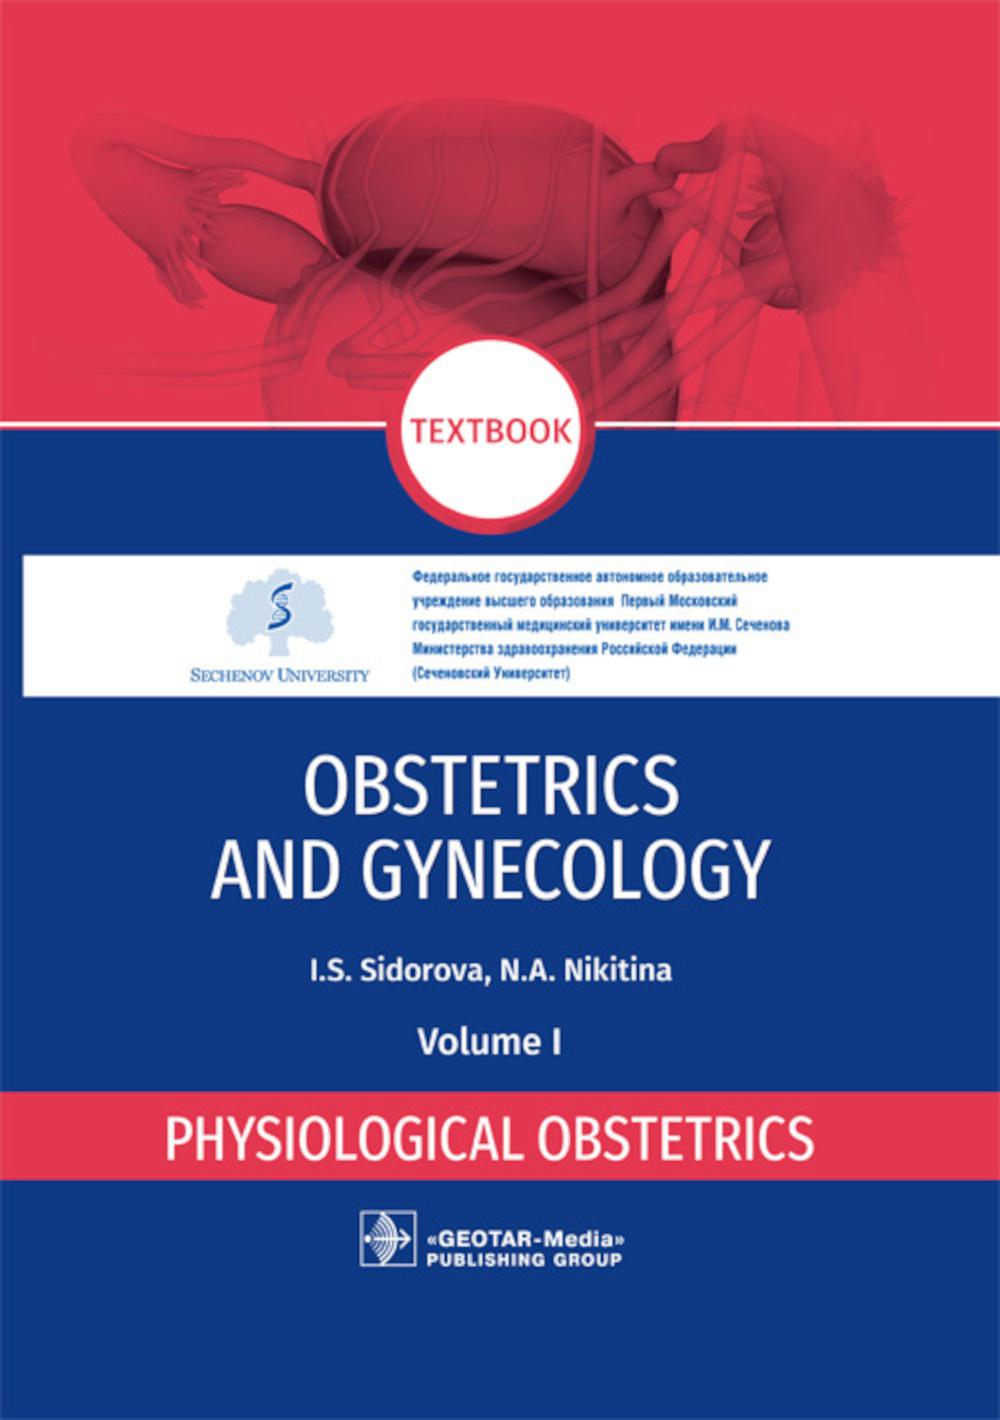 Obstetrics and gynecology: textbook: in 4 vol. Vol. 1. Physiological obstetrics =   .  4 . . 1:  